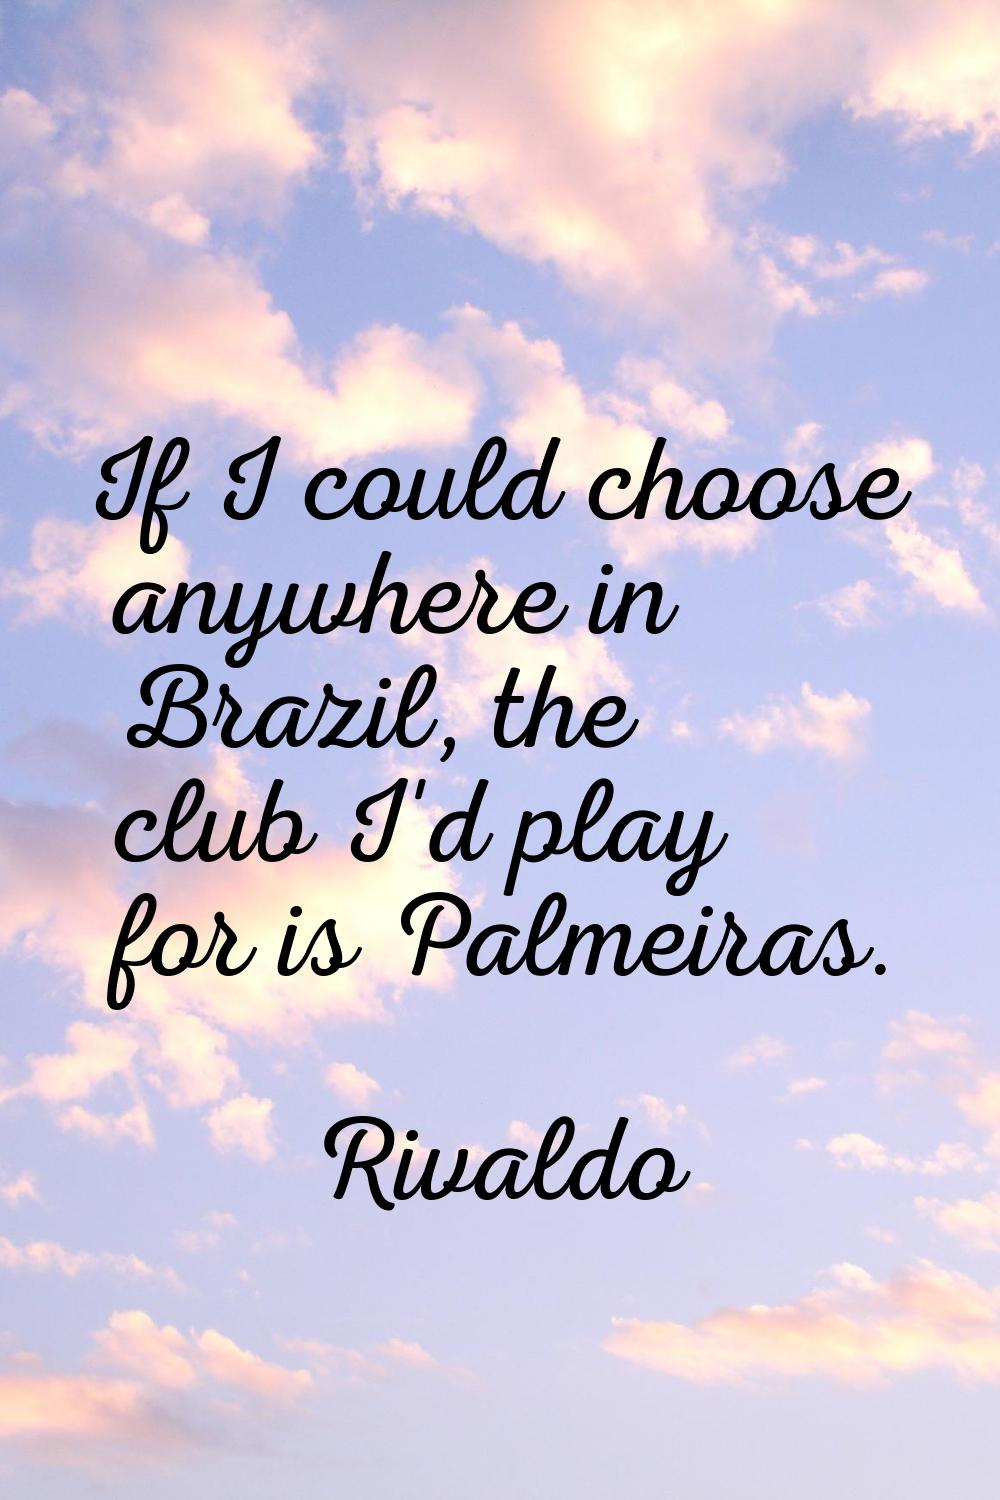 If I could choose anywhere in Brazil, the club I'd play for is Palmeiras.